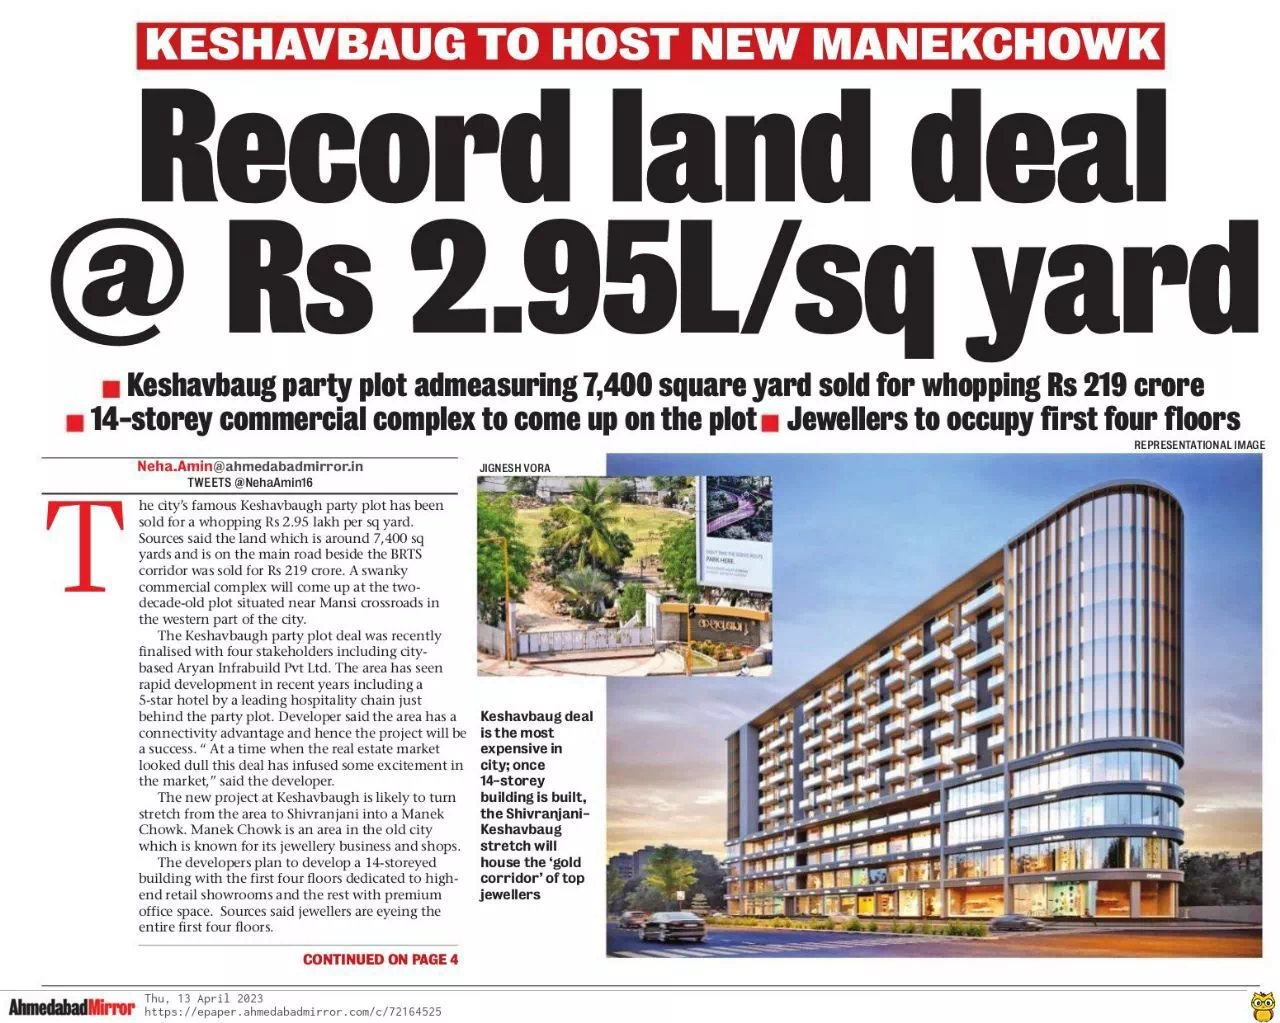 Keshavbaug Party Plot Admeasuring 7,400 Square Yard Sold For Whopping Rs 219 Crore, 14-Storey Commercial Complex To Come Up On The Plot Jewellers To Occupy First Four Floors  Source: Ahmedabad Mirror